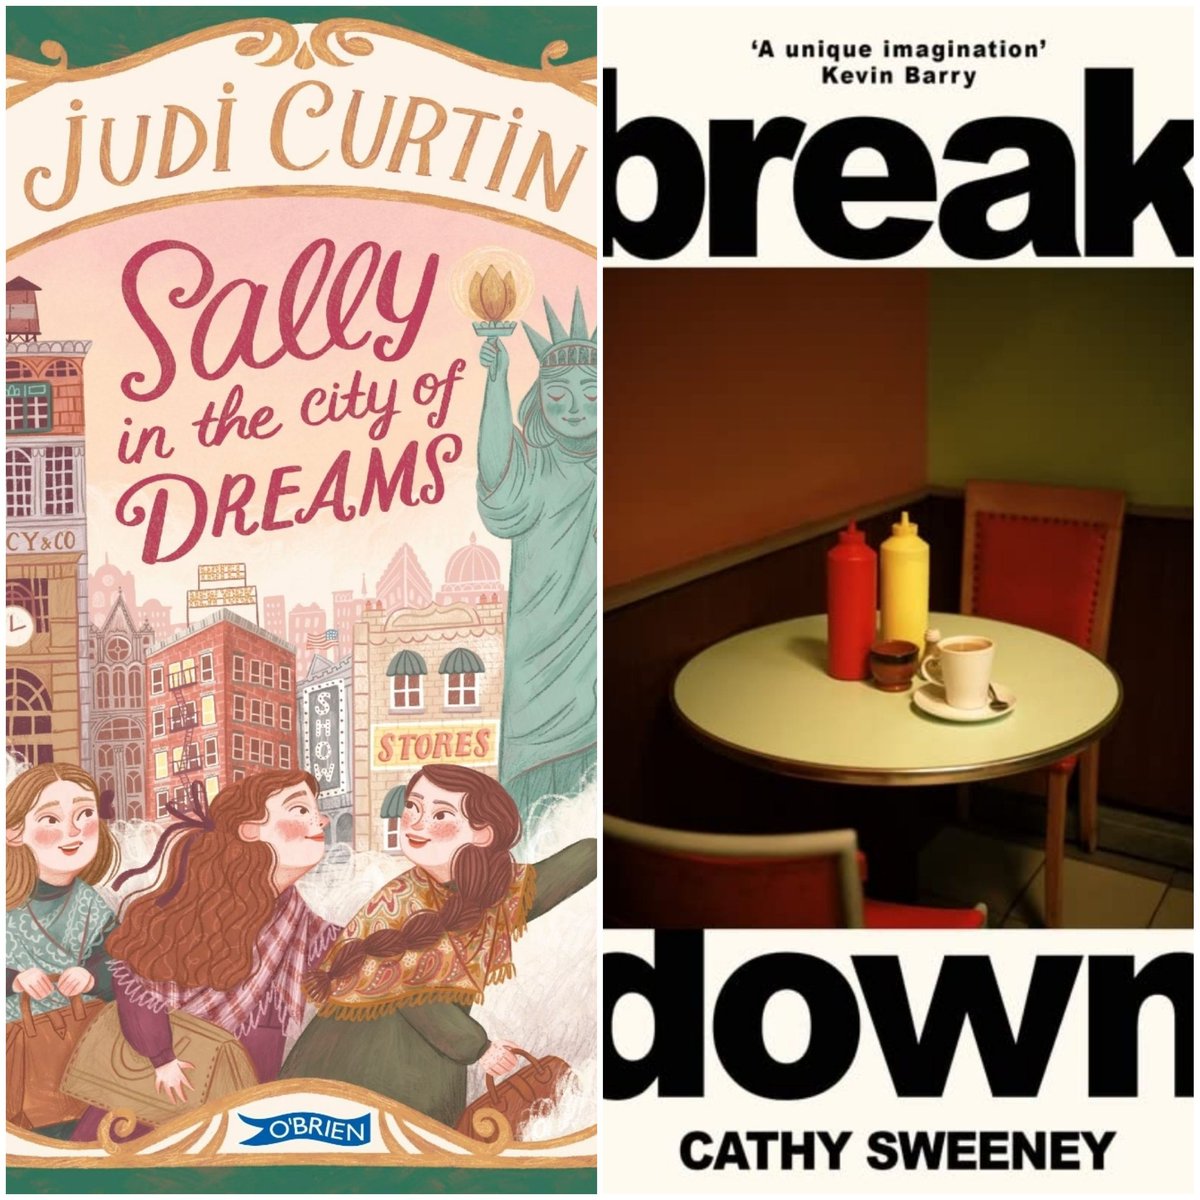 Day 7 of #ReadIrishWomenChallenge24
A book with a fresh start. For the grownups 'Breakdown' by Cathy Sweeney and for MG readers 'Sally in the City of Dreams' by Judi Curtin. @judi_curtin @wnbooks @OBrienPress @DubrayBooks @IrishKidsBooks